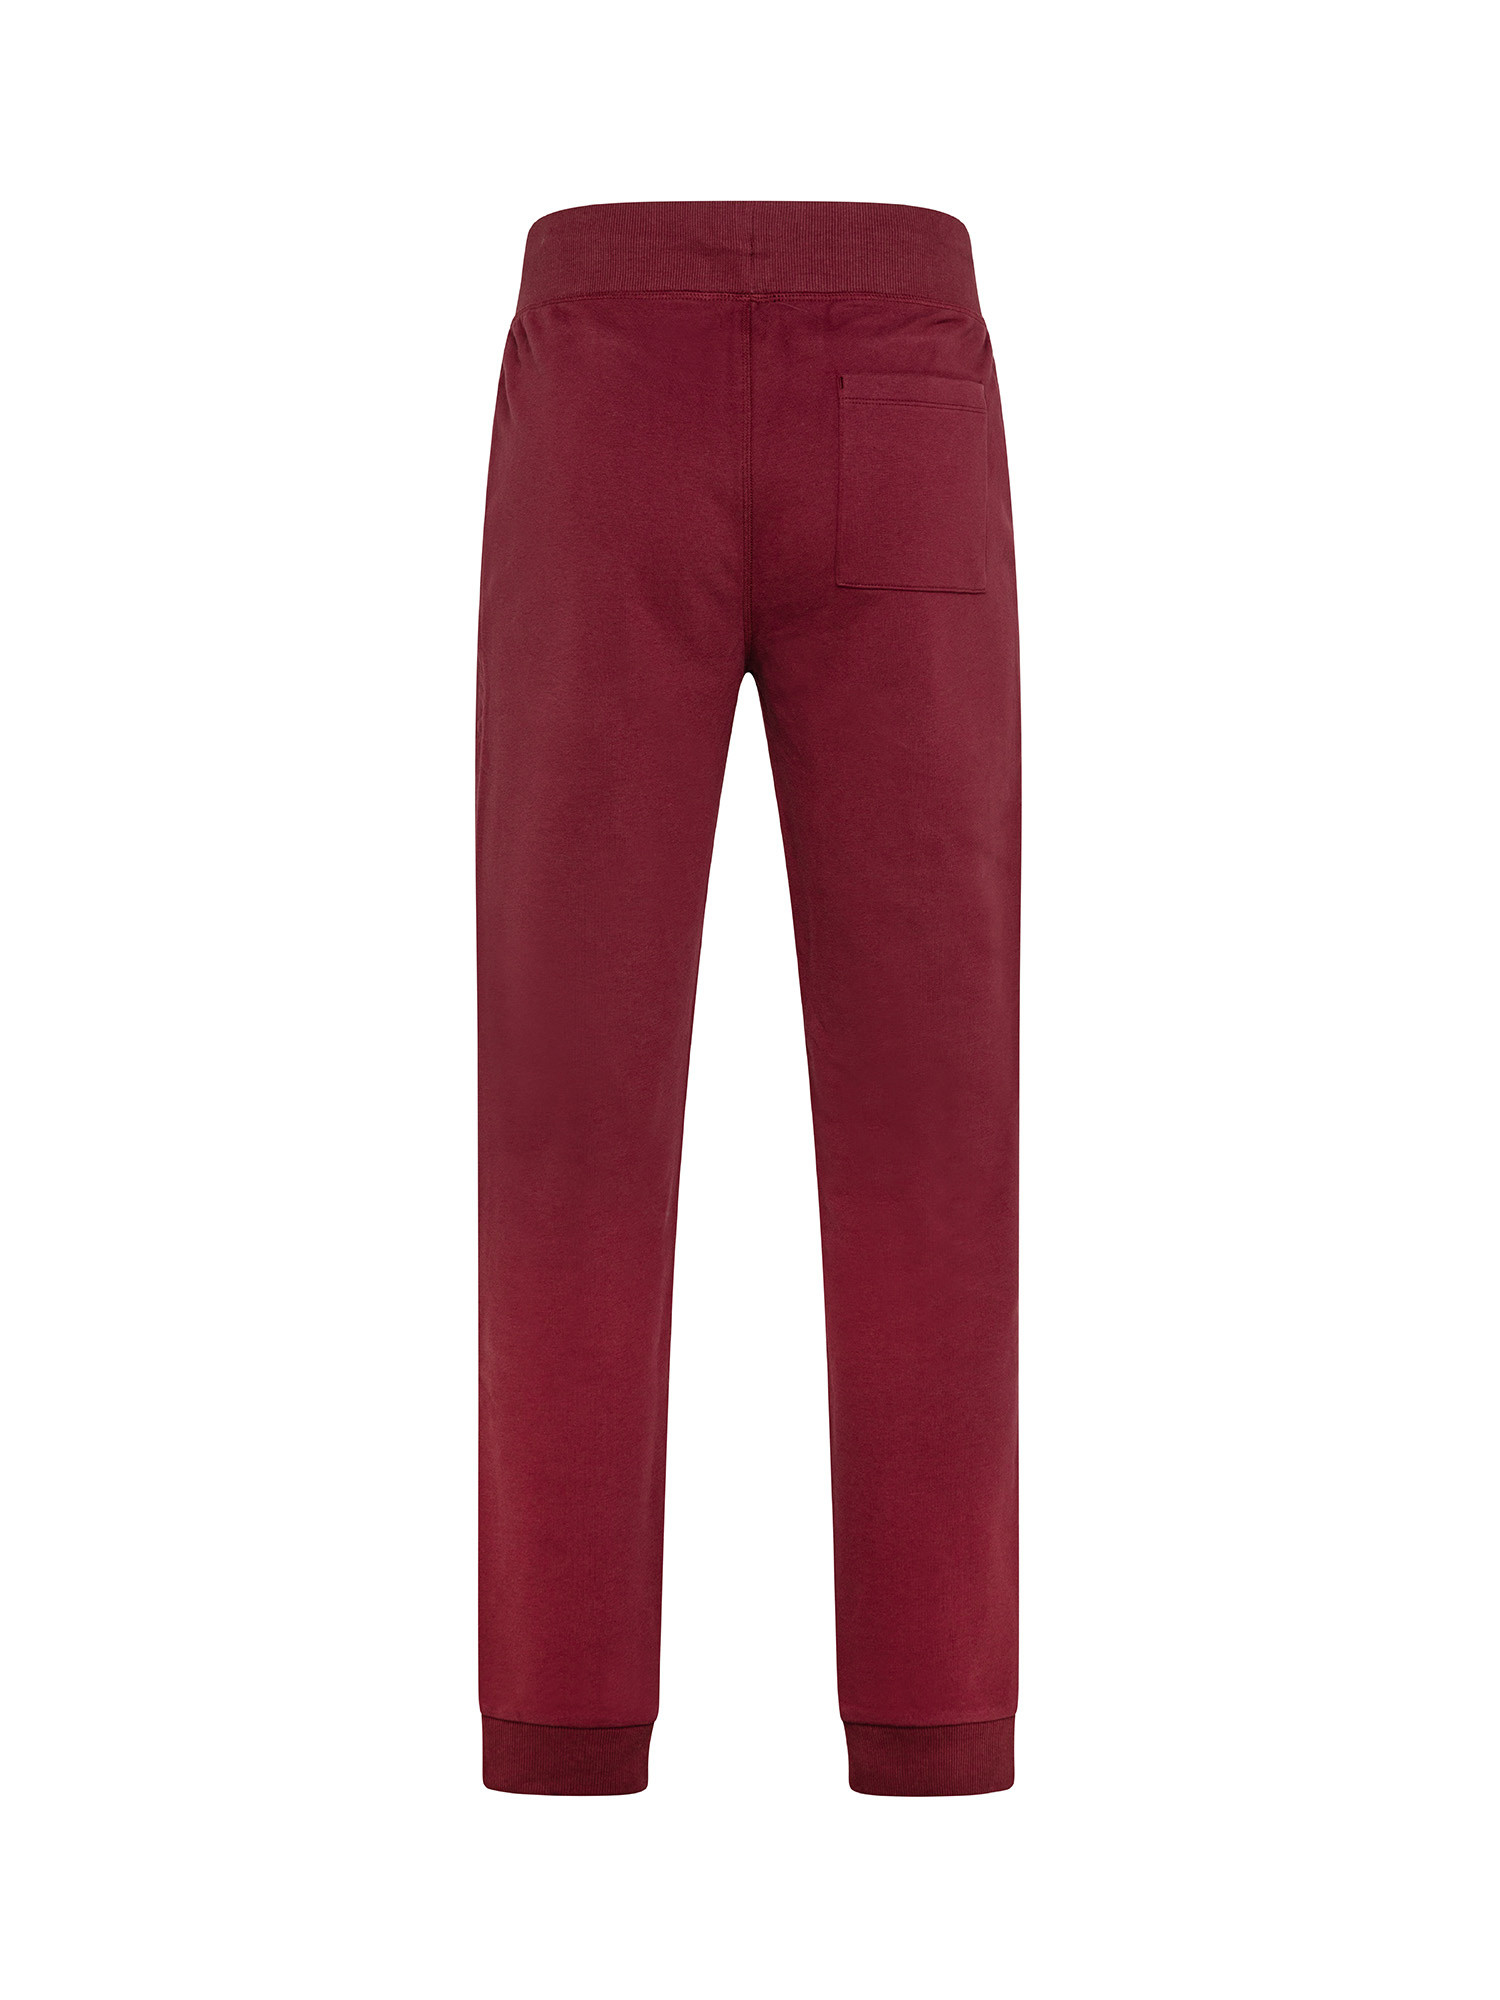 JCT - Soft touch five-pocket trousers, Red Bordeaux, large image number 1